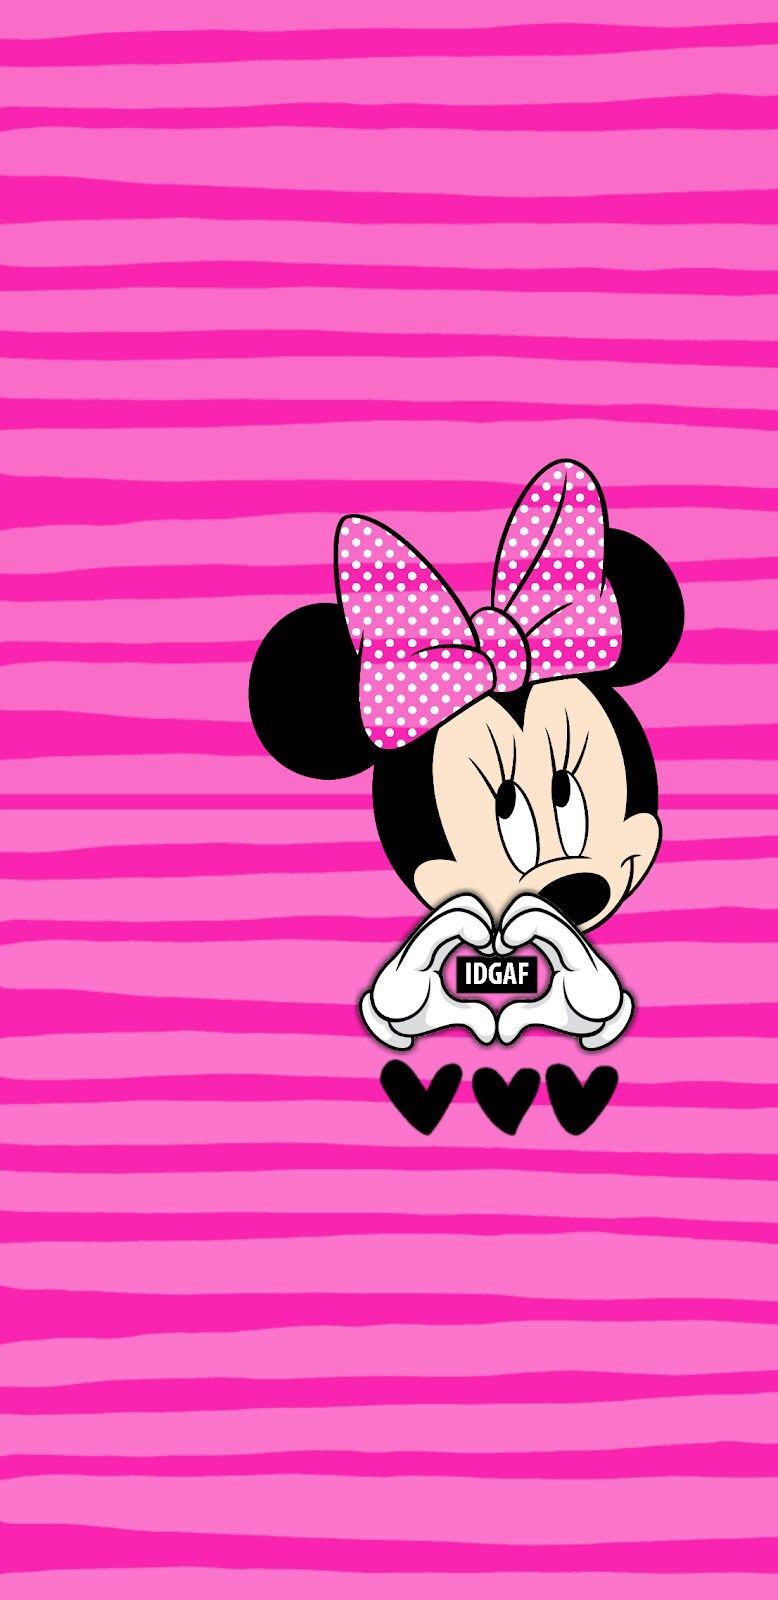  Minnie Mouse Hintergrundbild 778x1600. Angelmom4 on Cute Wallz. Mickey mouse wallpaper, Minnie mouse image, Mickey mouse art